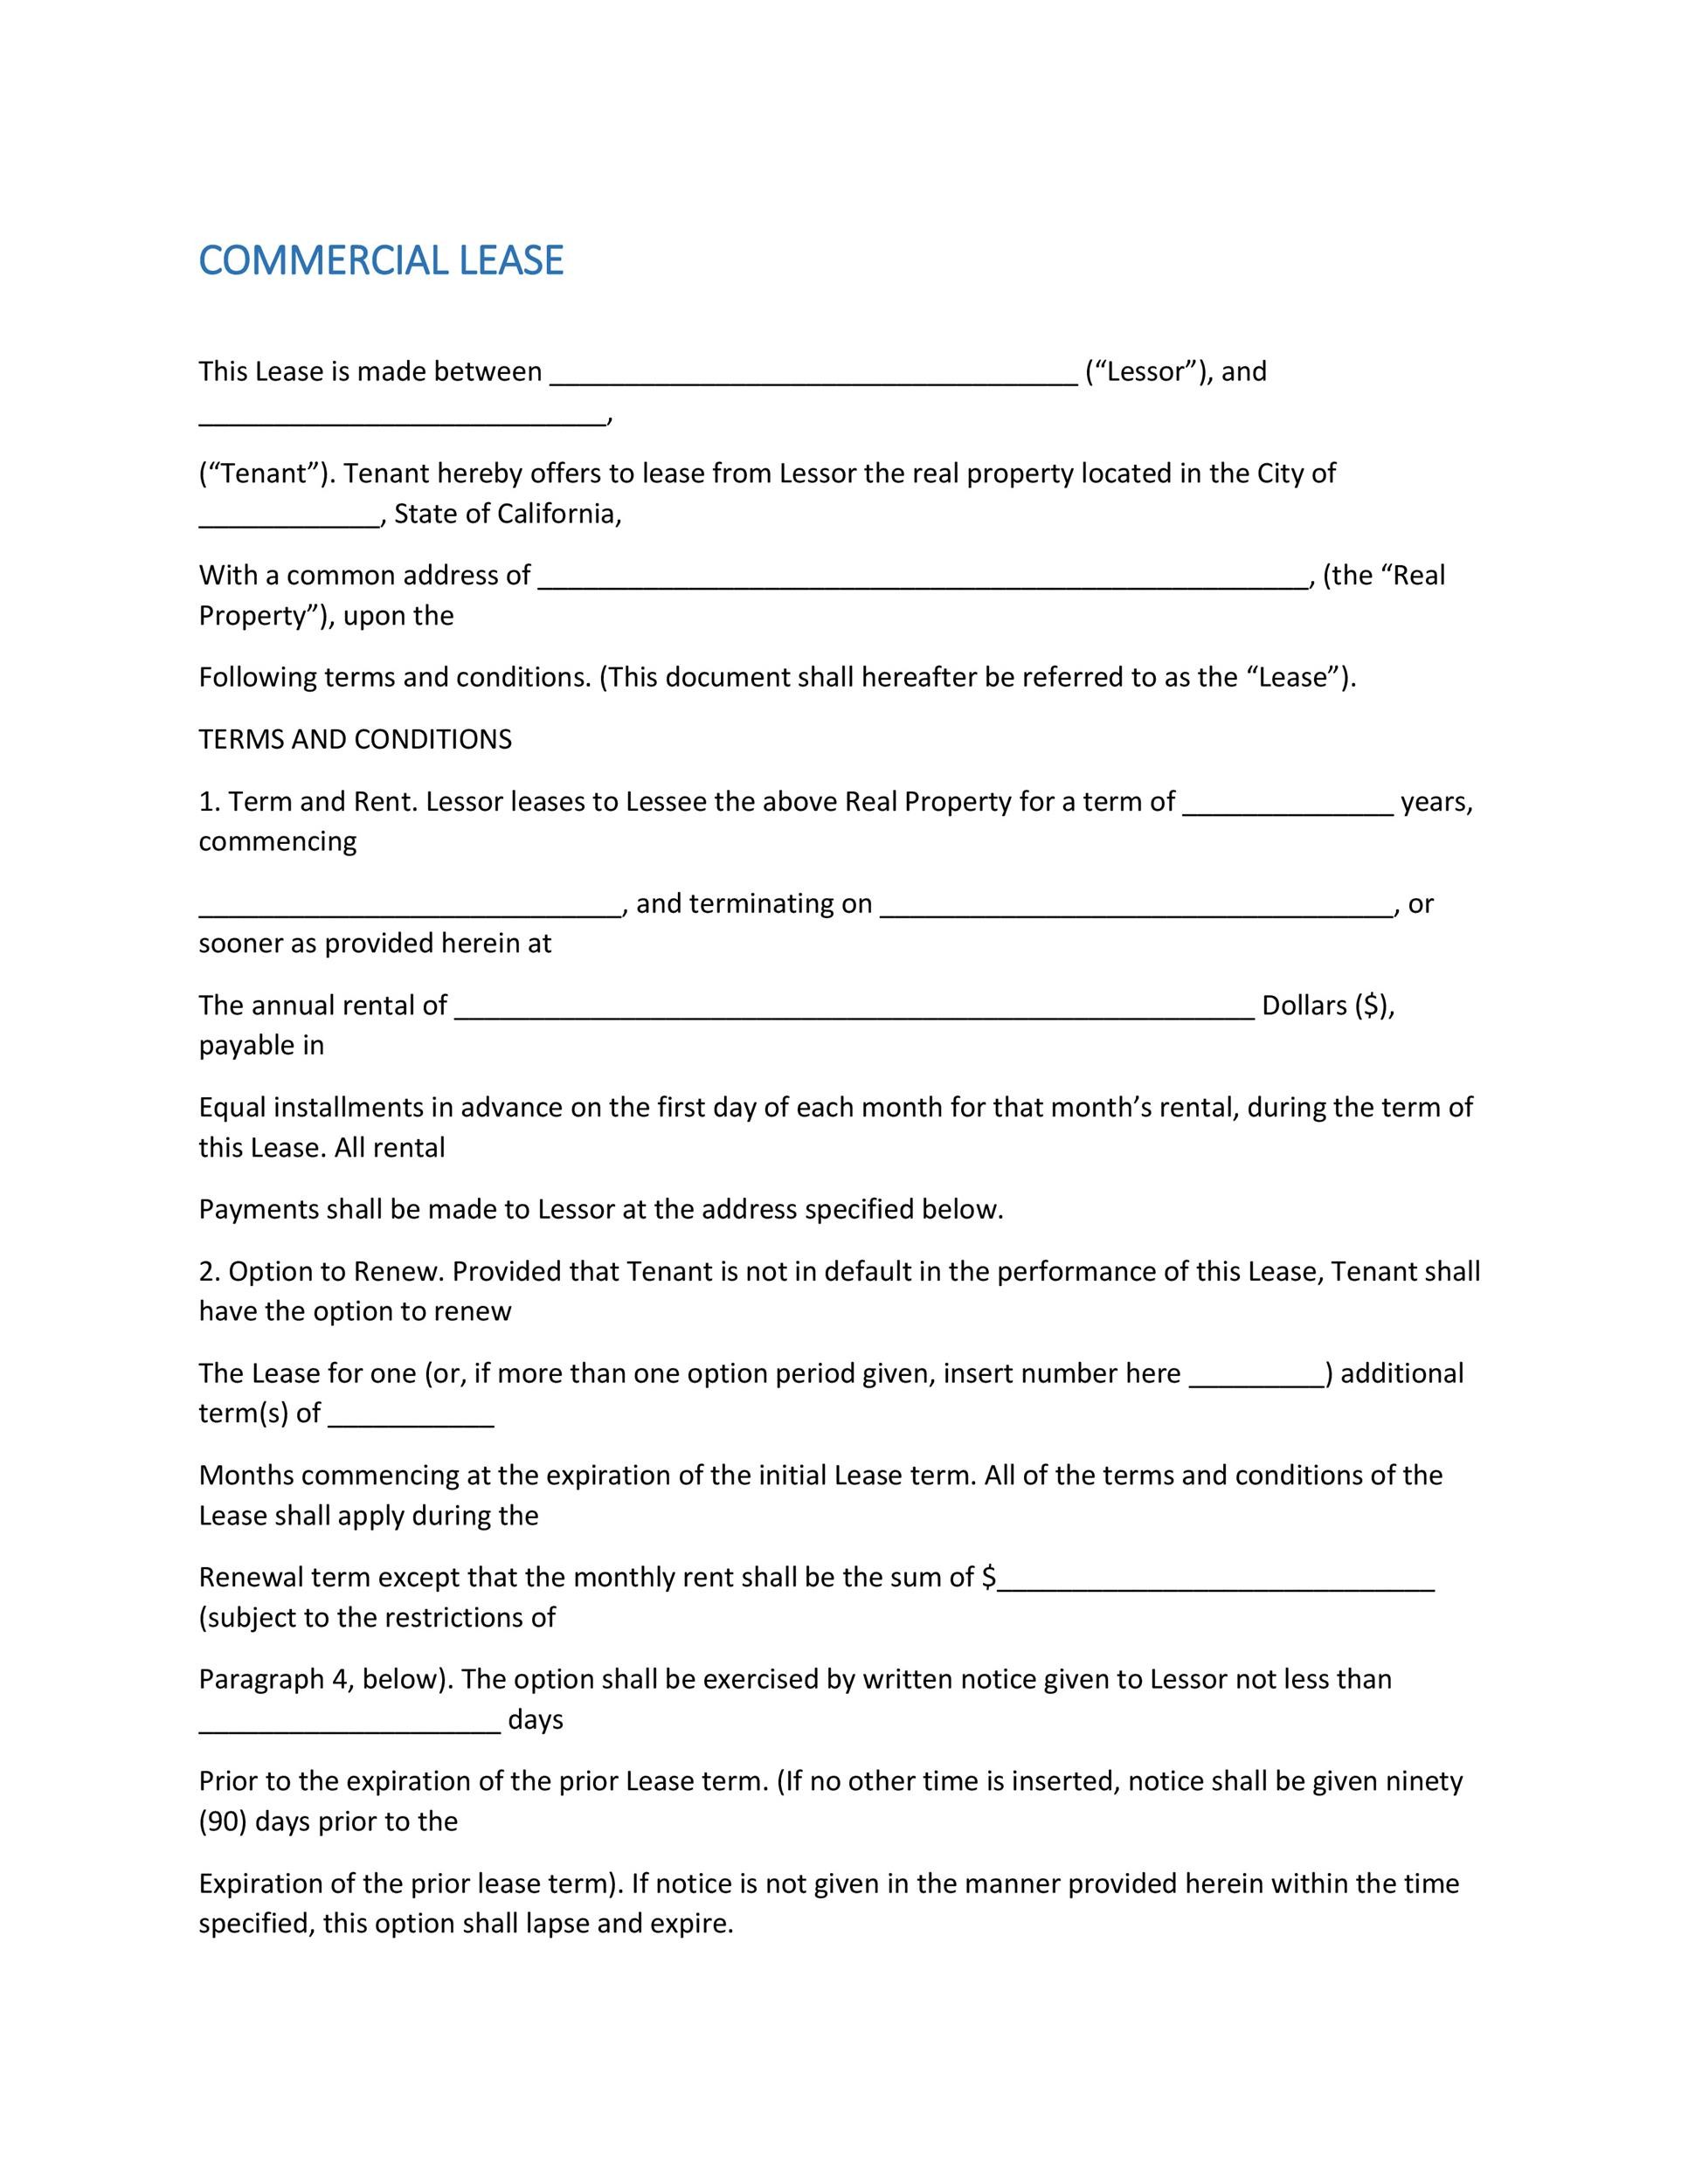 Free Commercial Lease Agreement Template 24